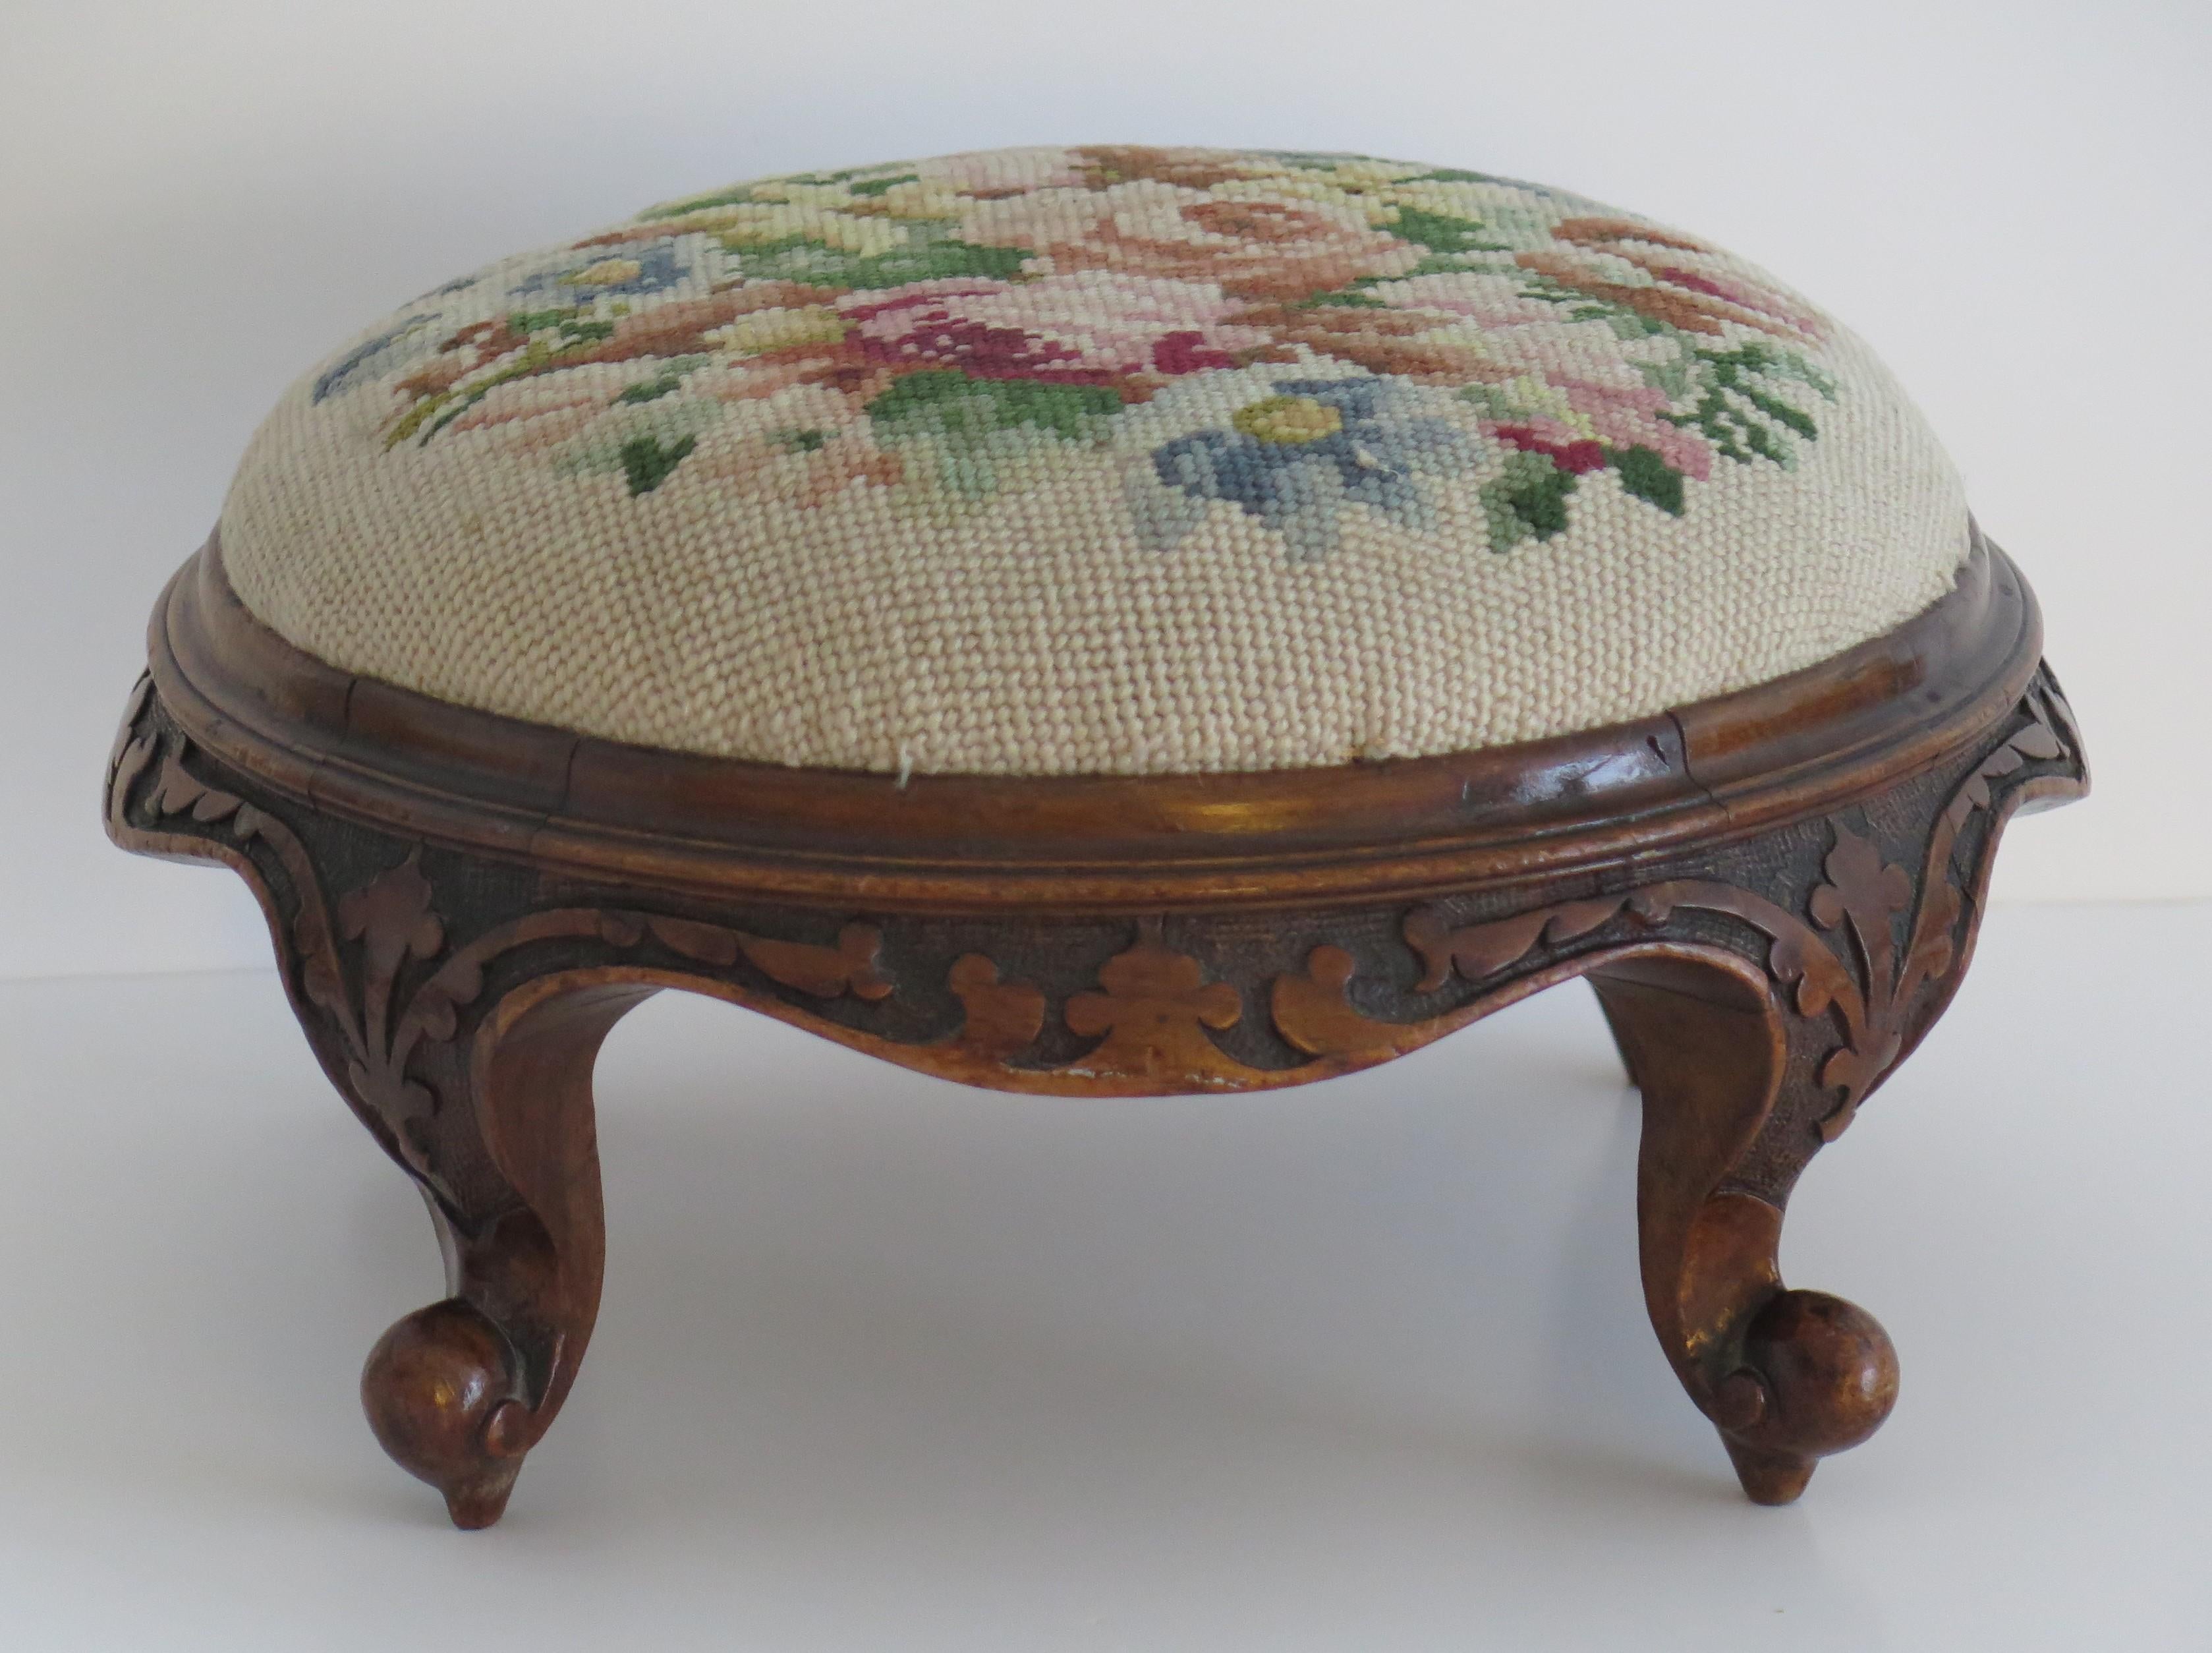 Hand-Crafted Foot Stool Early Victorian Carved Walnut with Wool-Work Top, English, Circa 1850 For Sale